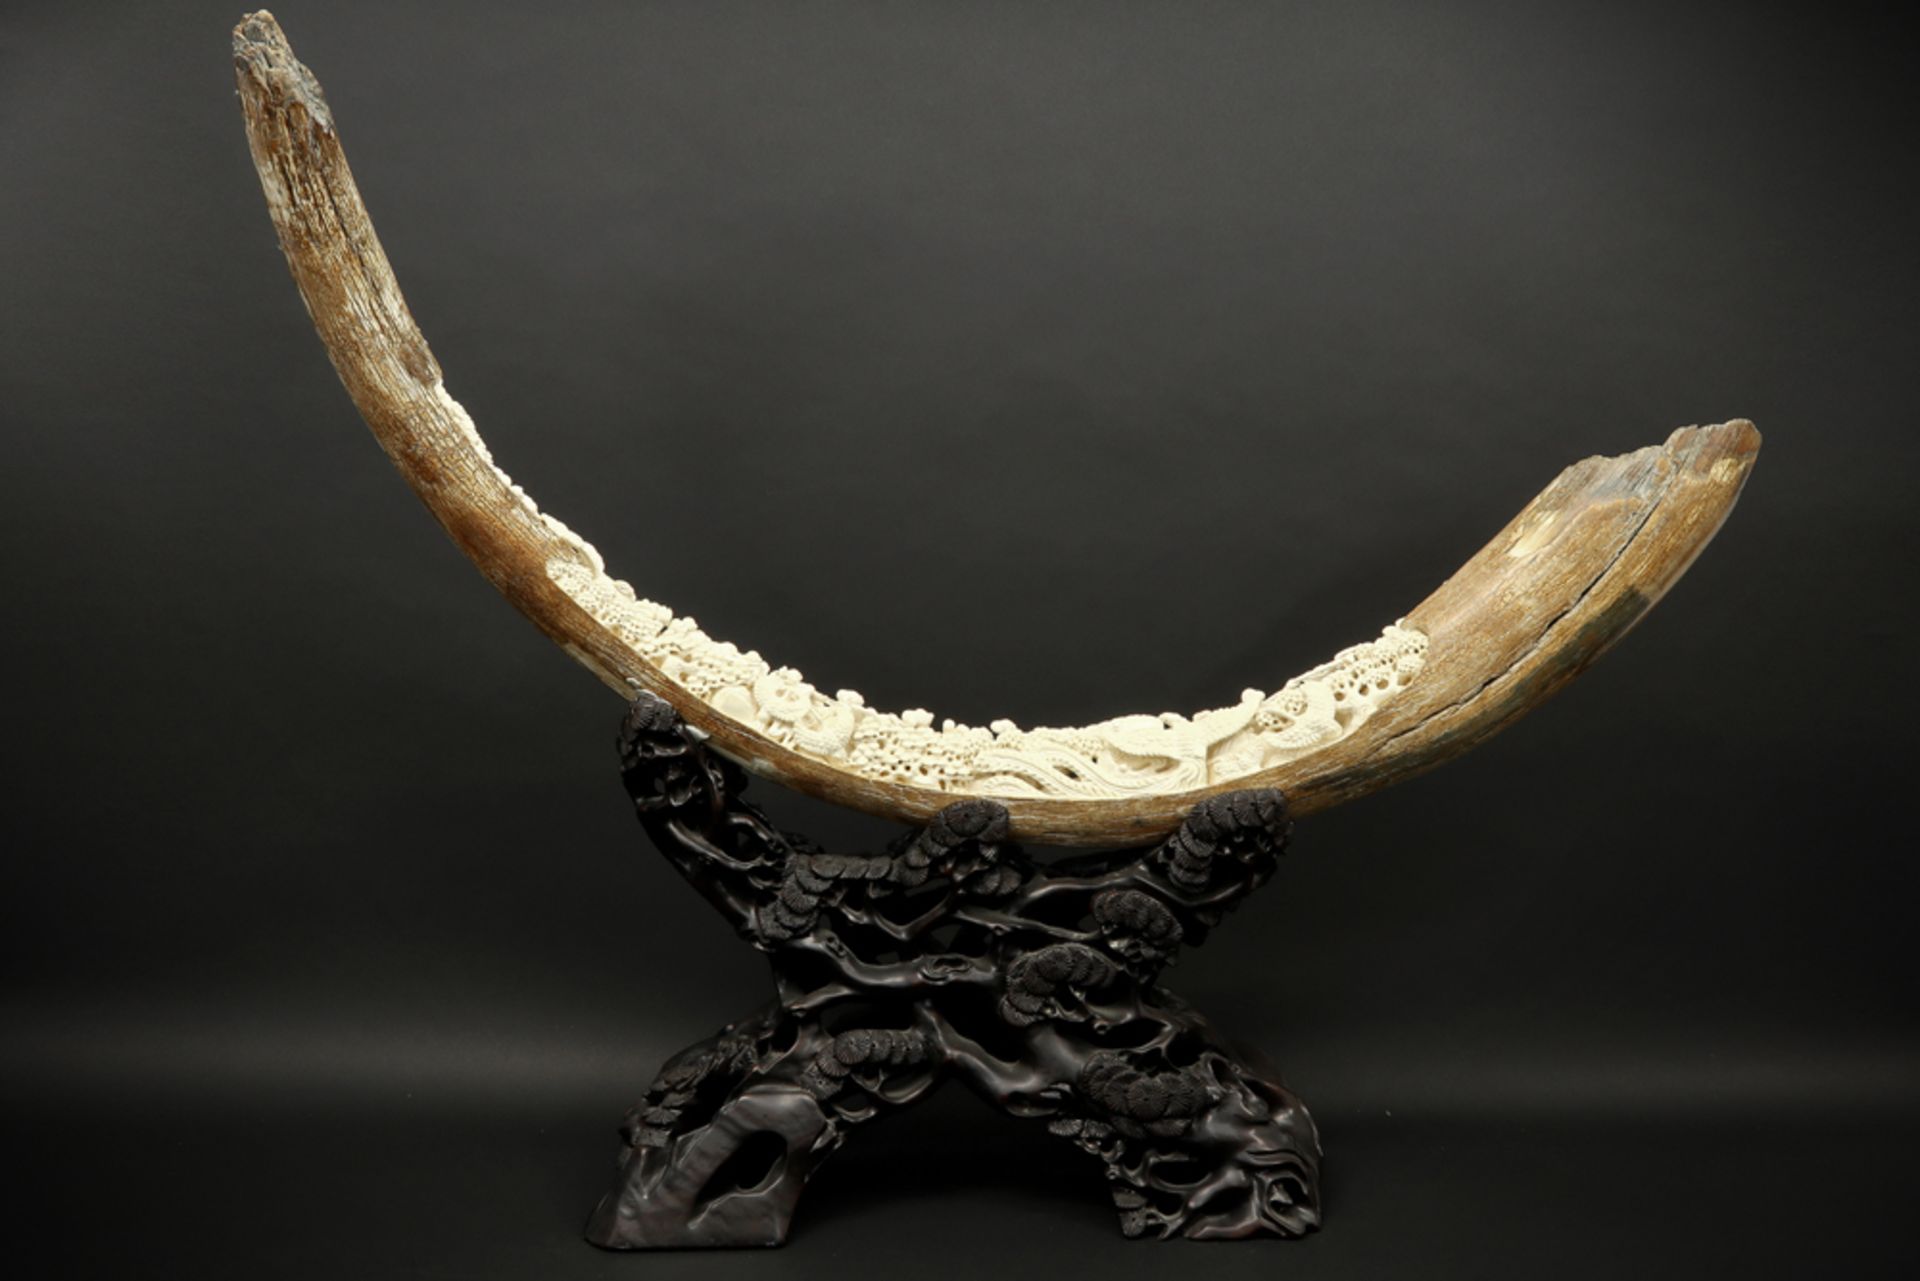 mammoth tusk with a fine Chinese sculpture on its wooden stand ||Chinese fijngebeeldhouwde sculptuur - Image 8 of 9